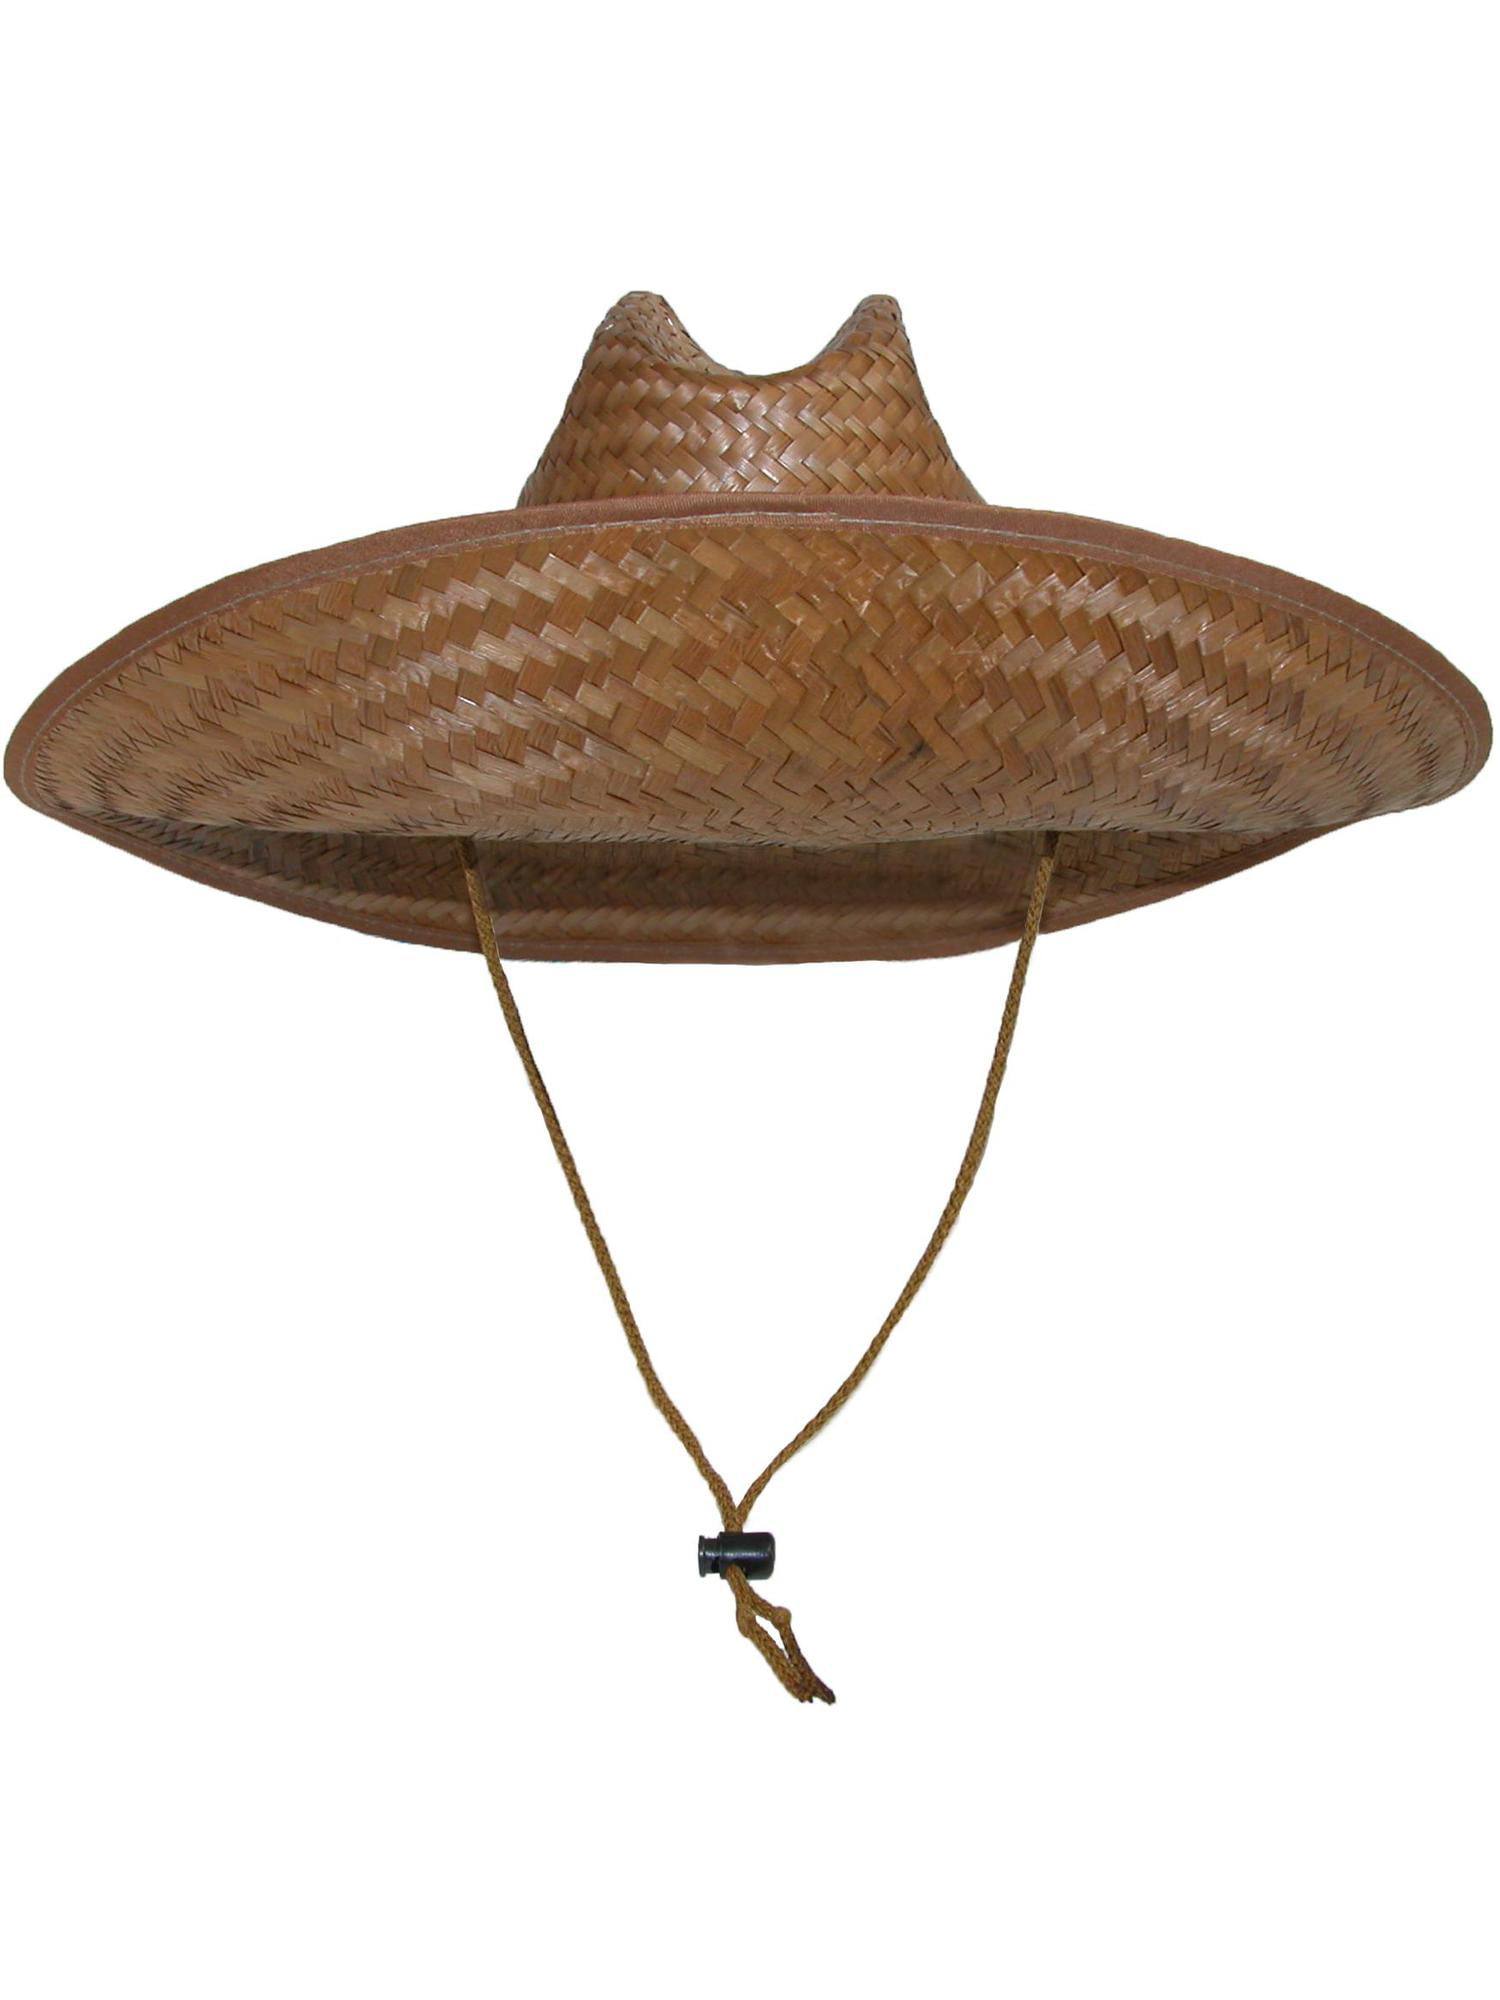 CTM Palm Straw Lifeguard Hat with Wide Brim 